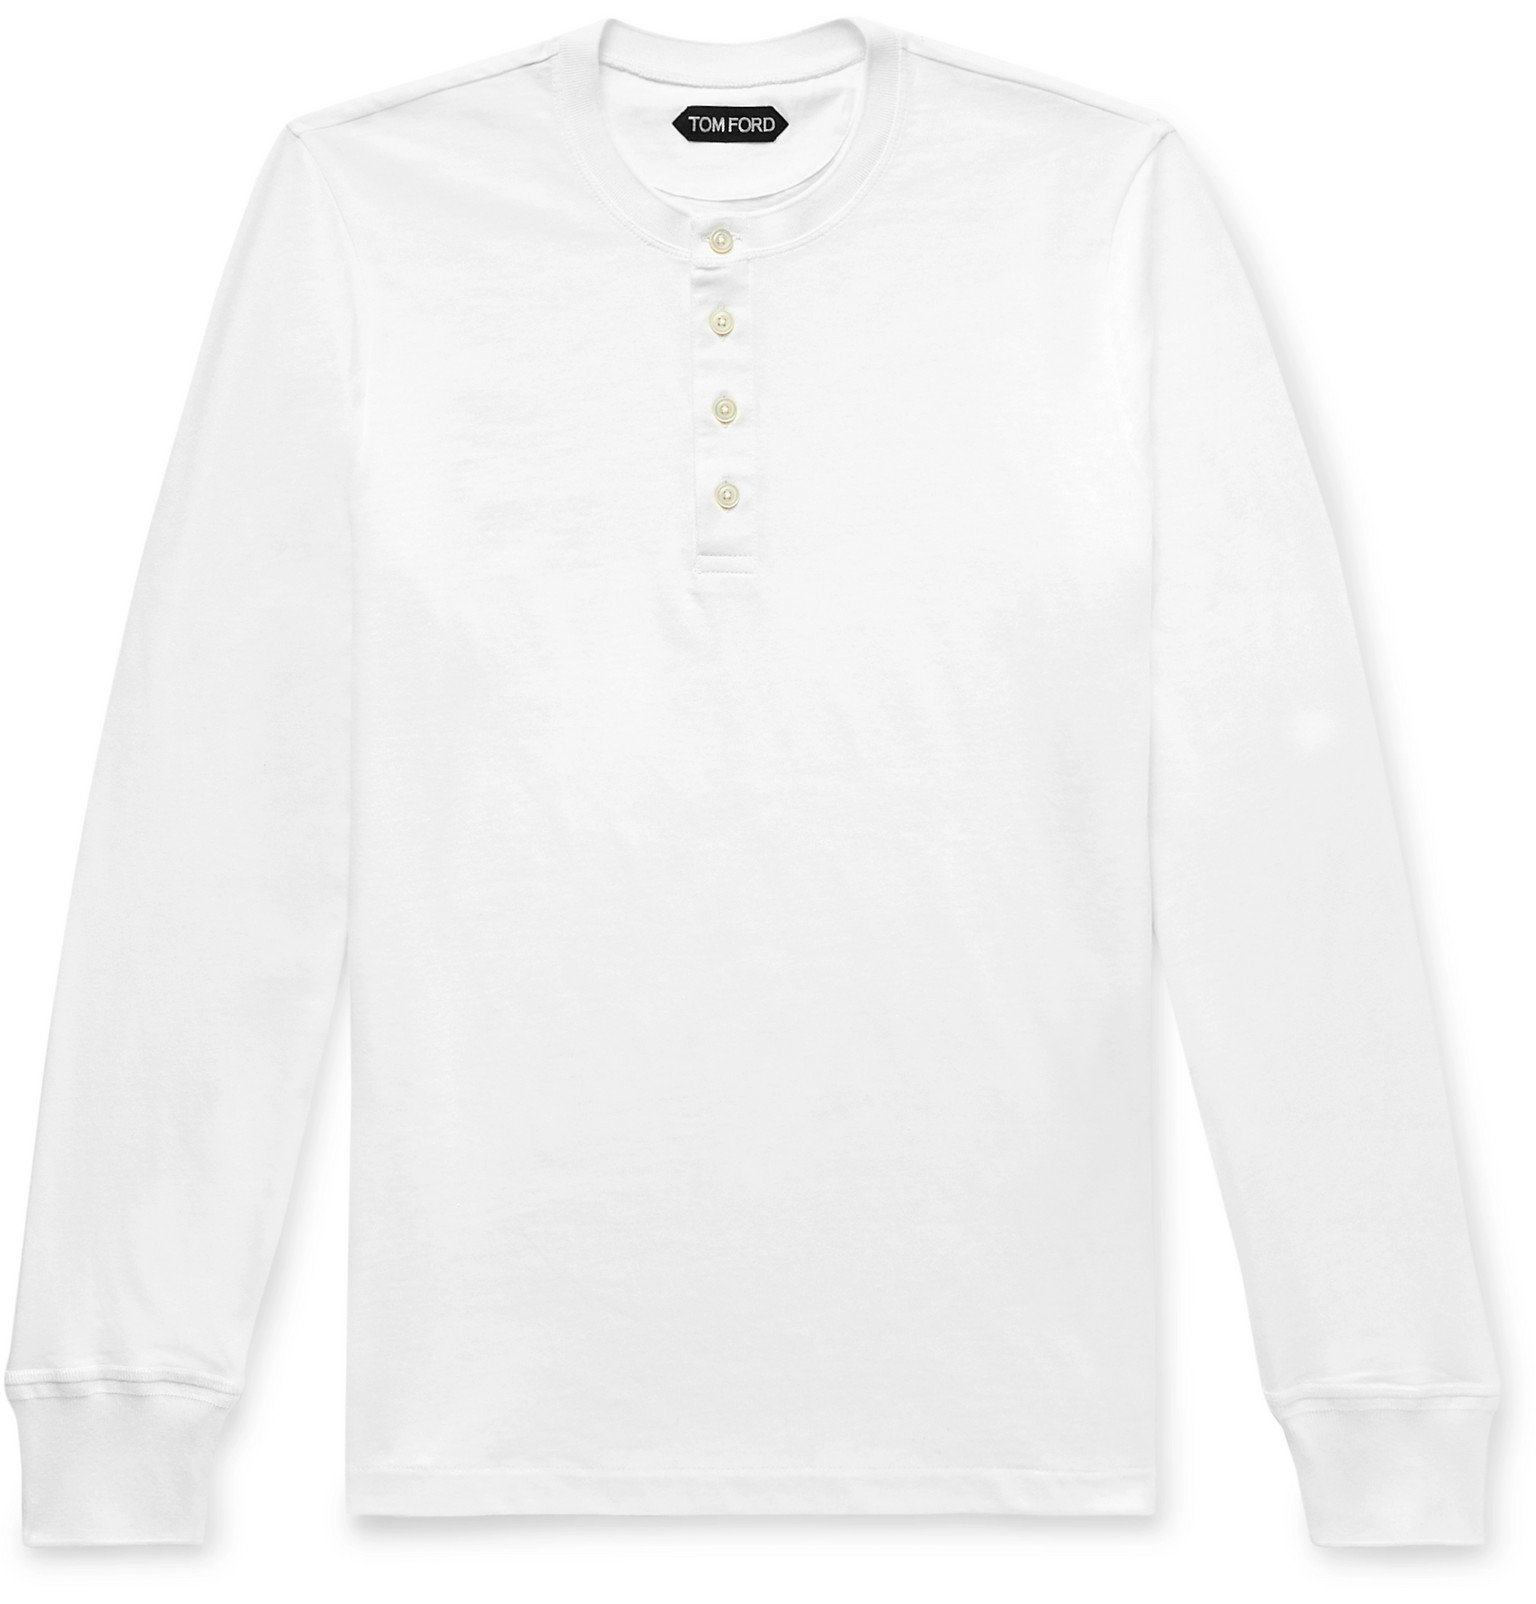 TOM FORD - Slim-Fit Cotton-Jersey Henley T-Shirt - White TOM FORD